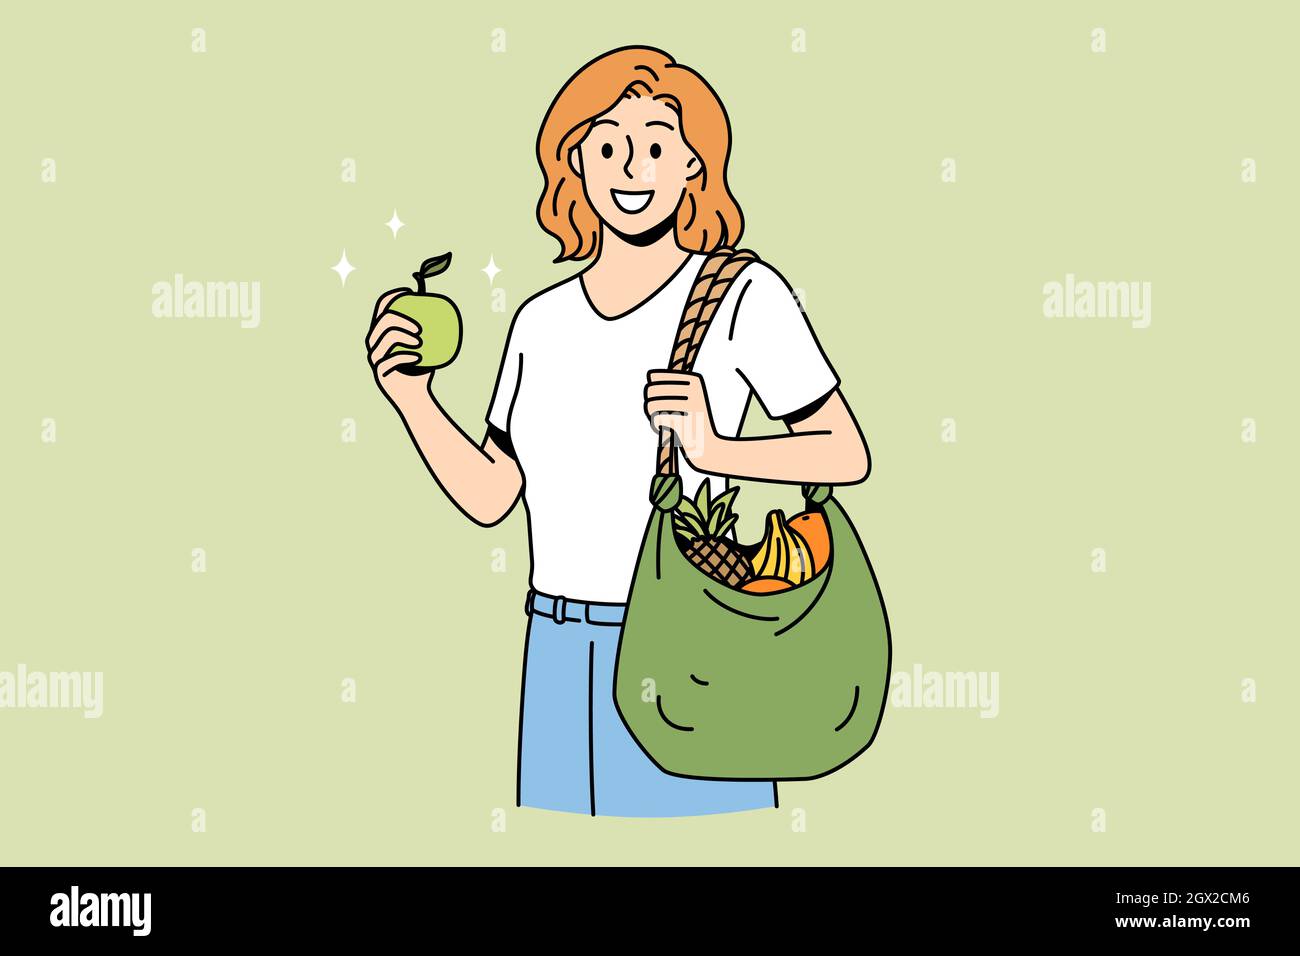 Healthy eating and lifestyle concept. Young smiling woman cartoon character standing with shopping bag full of fresh fruits after market vector illustration  Stock Vector